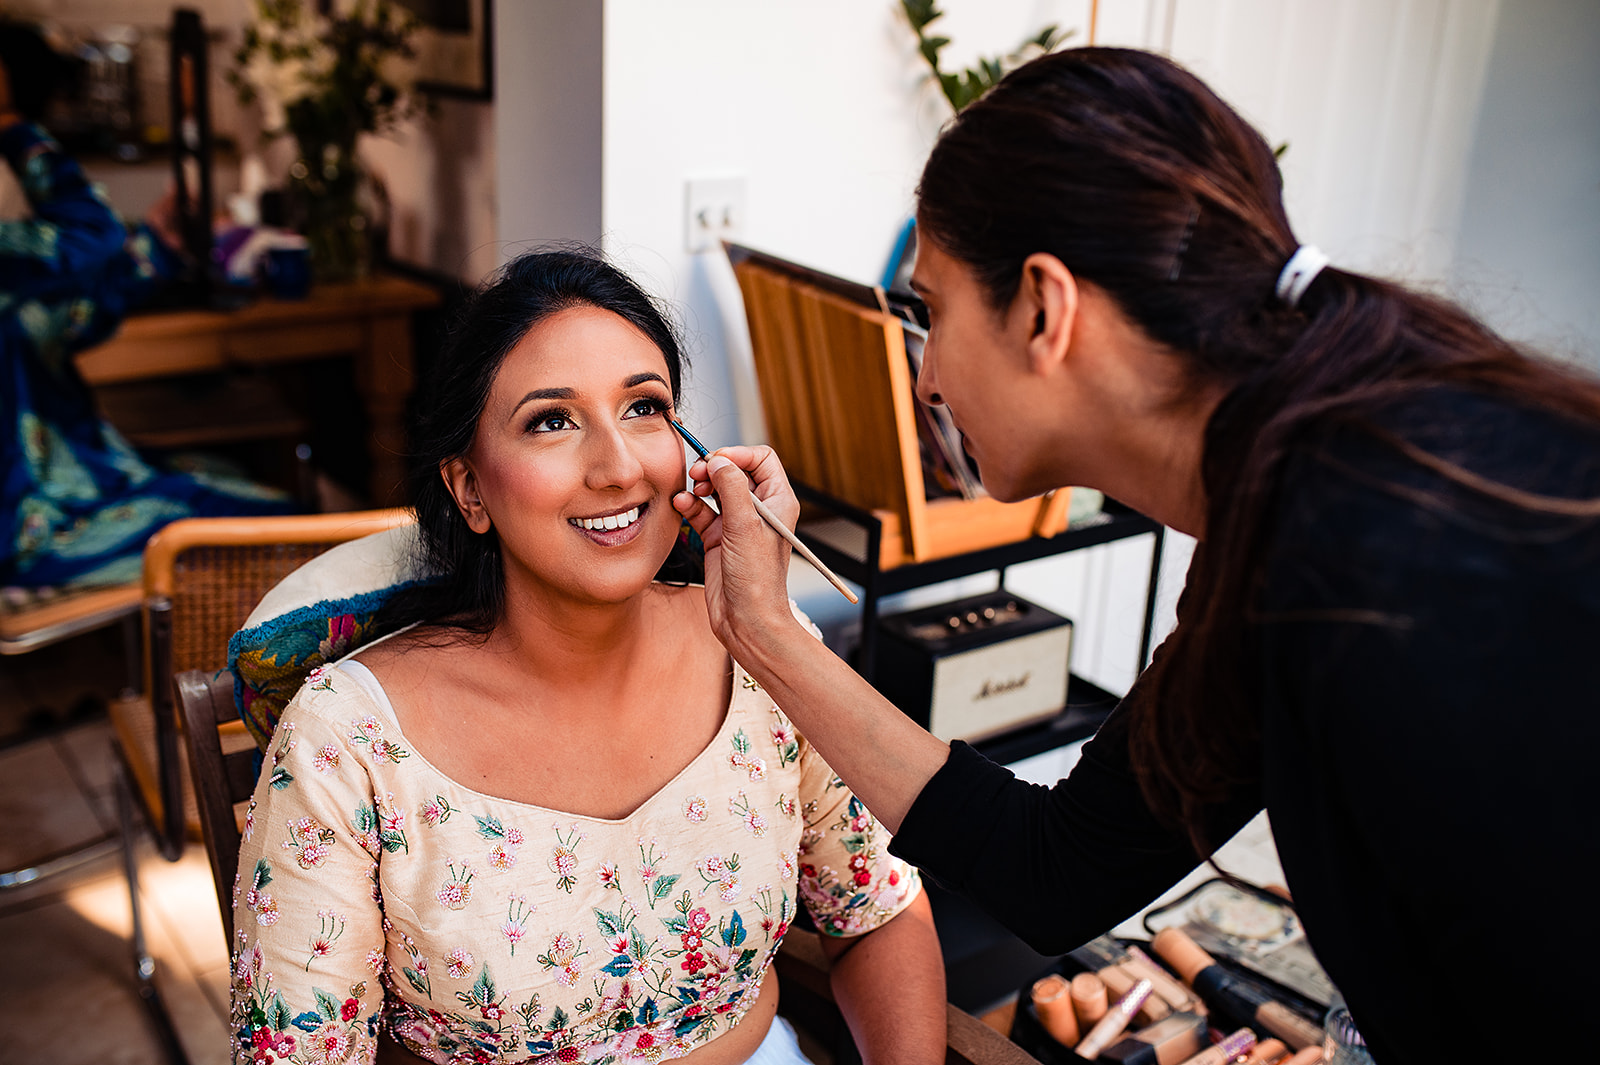 The bride gets her makeup done, and is beaming. She is sat down with her traditional Hindu outfit on that is adorned with embroidered flowers of all different colours. The lighting is bright and summery.